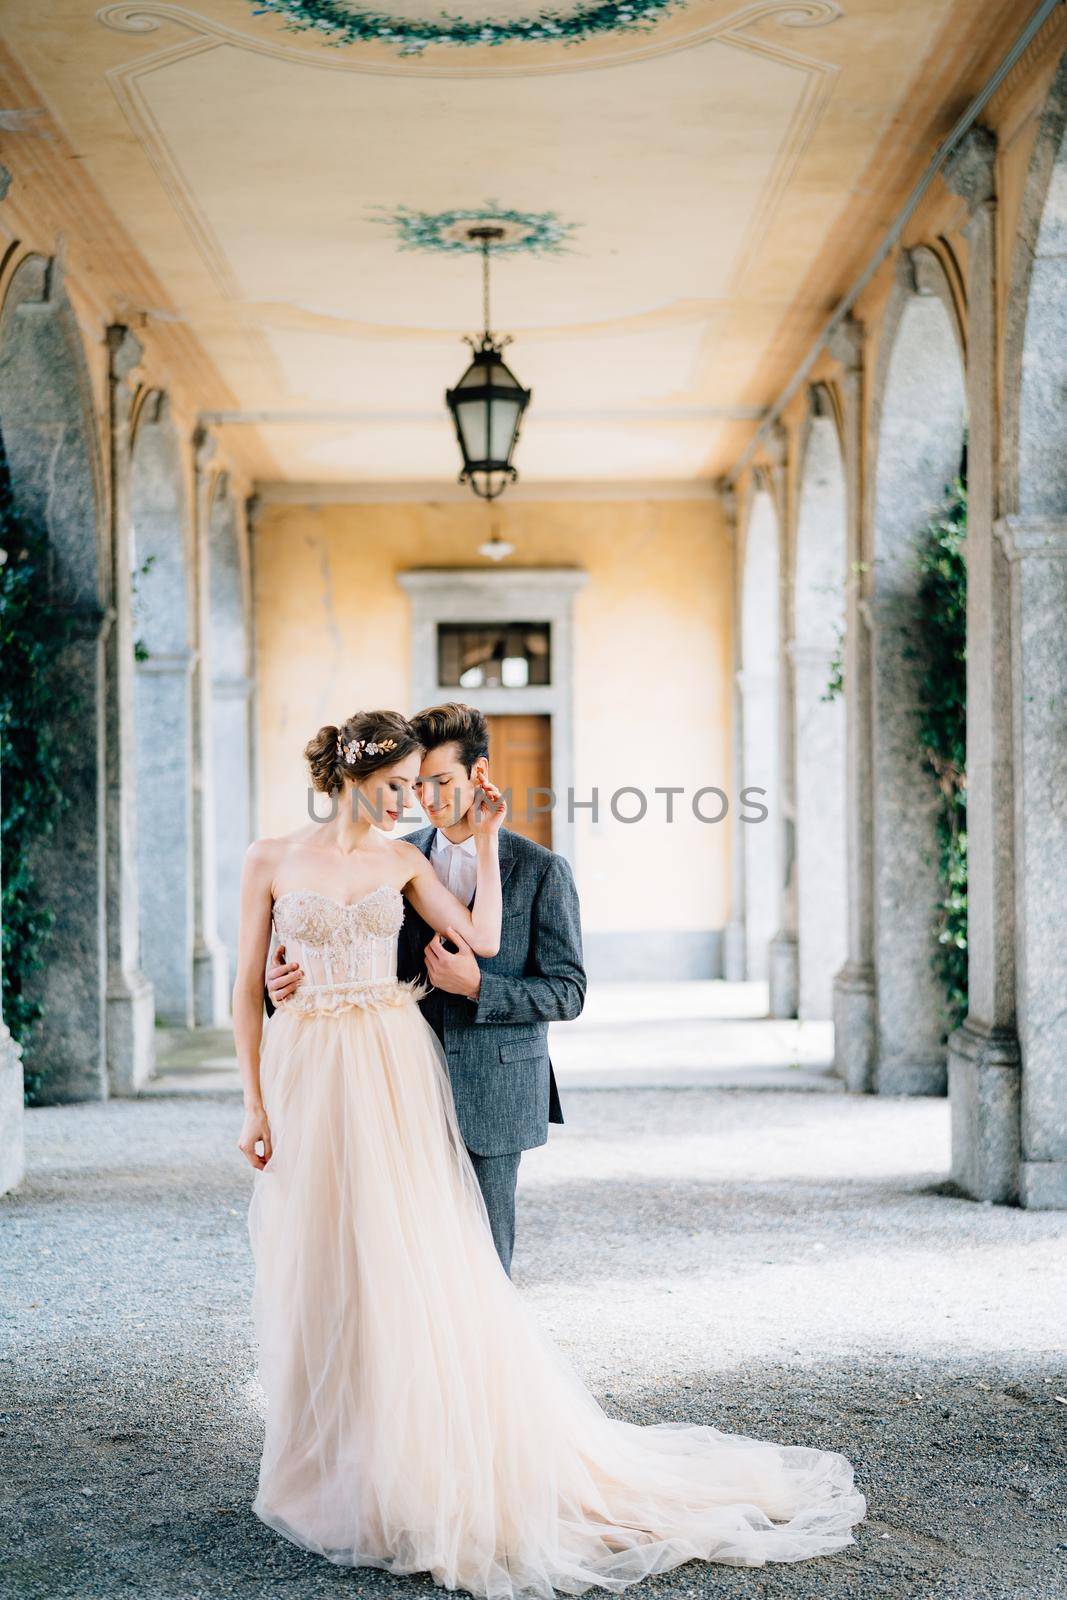 Smiling groom hugs bride on an old terrace with columns entwined with green ivy. Lake Como, Italy. High quality photo